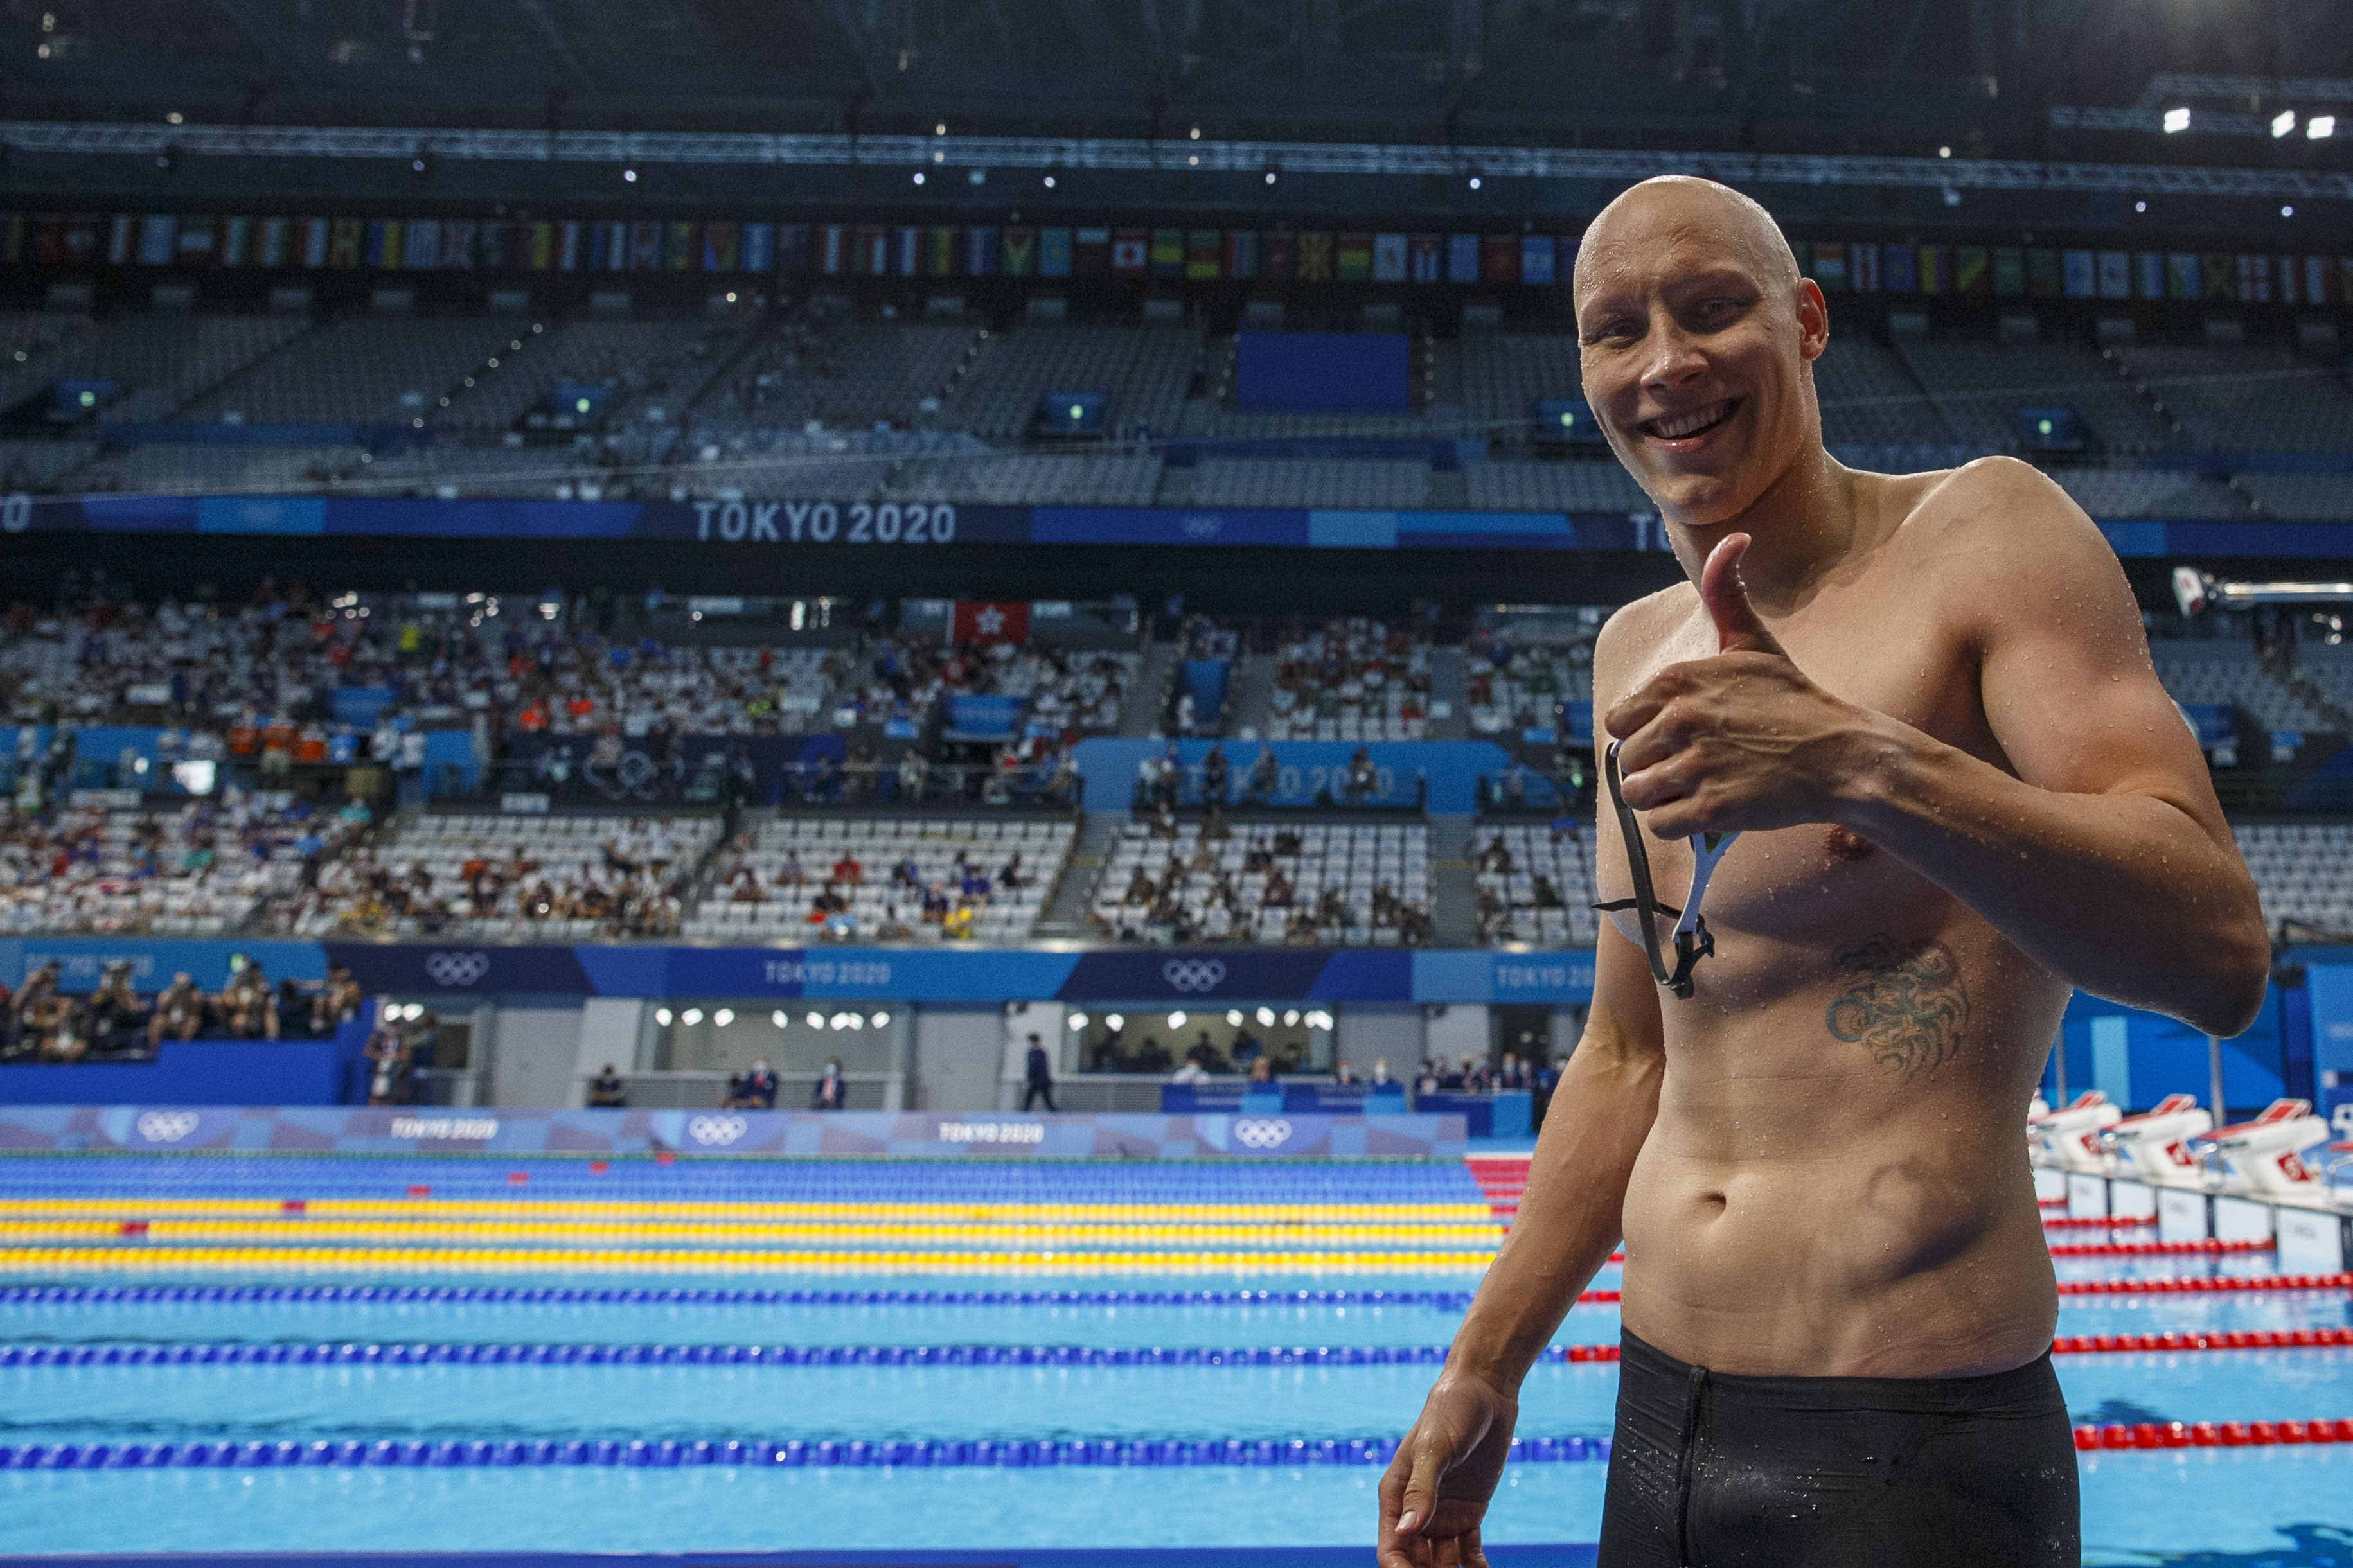 Swimmer Mattsson won Finland's first medal at the Tokyo Olympics